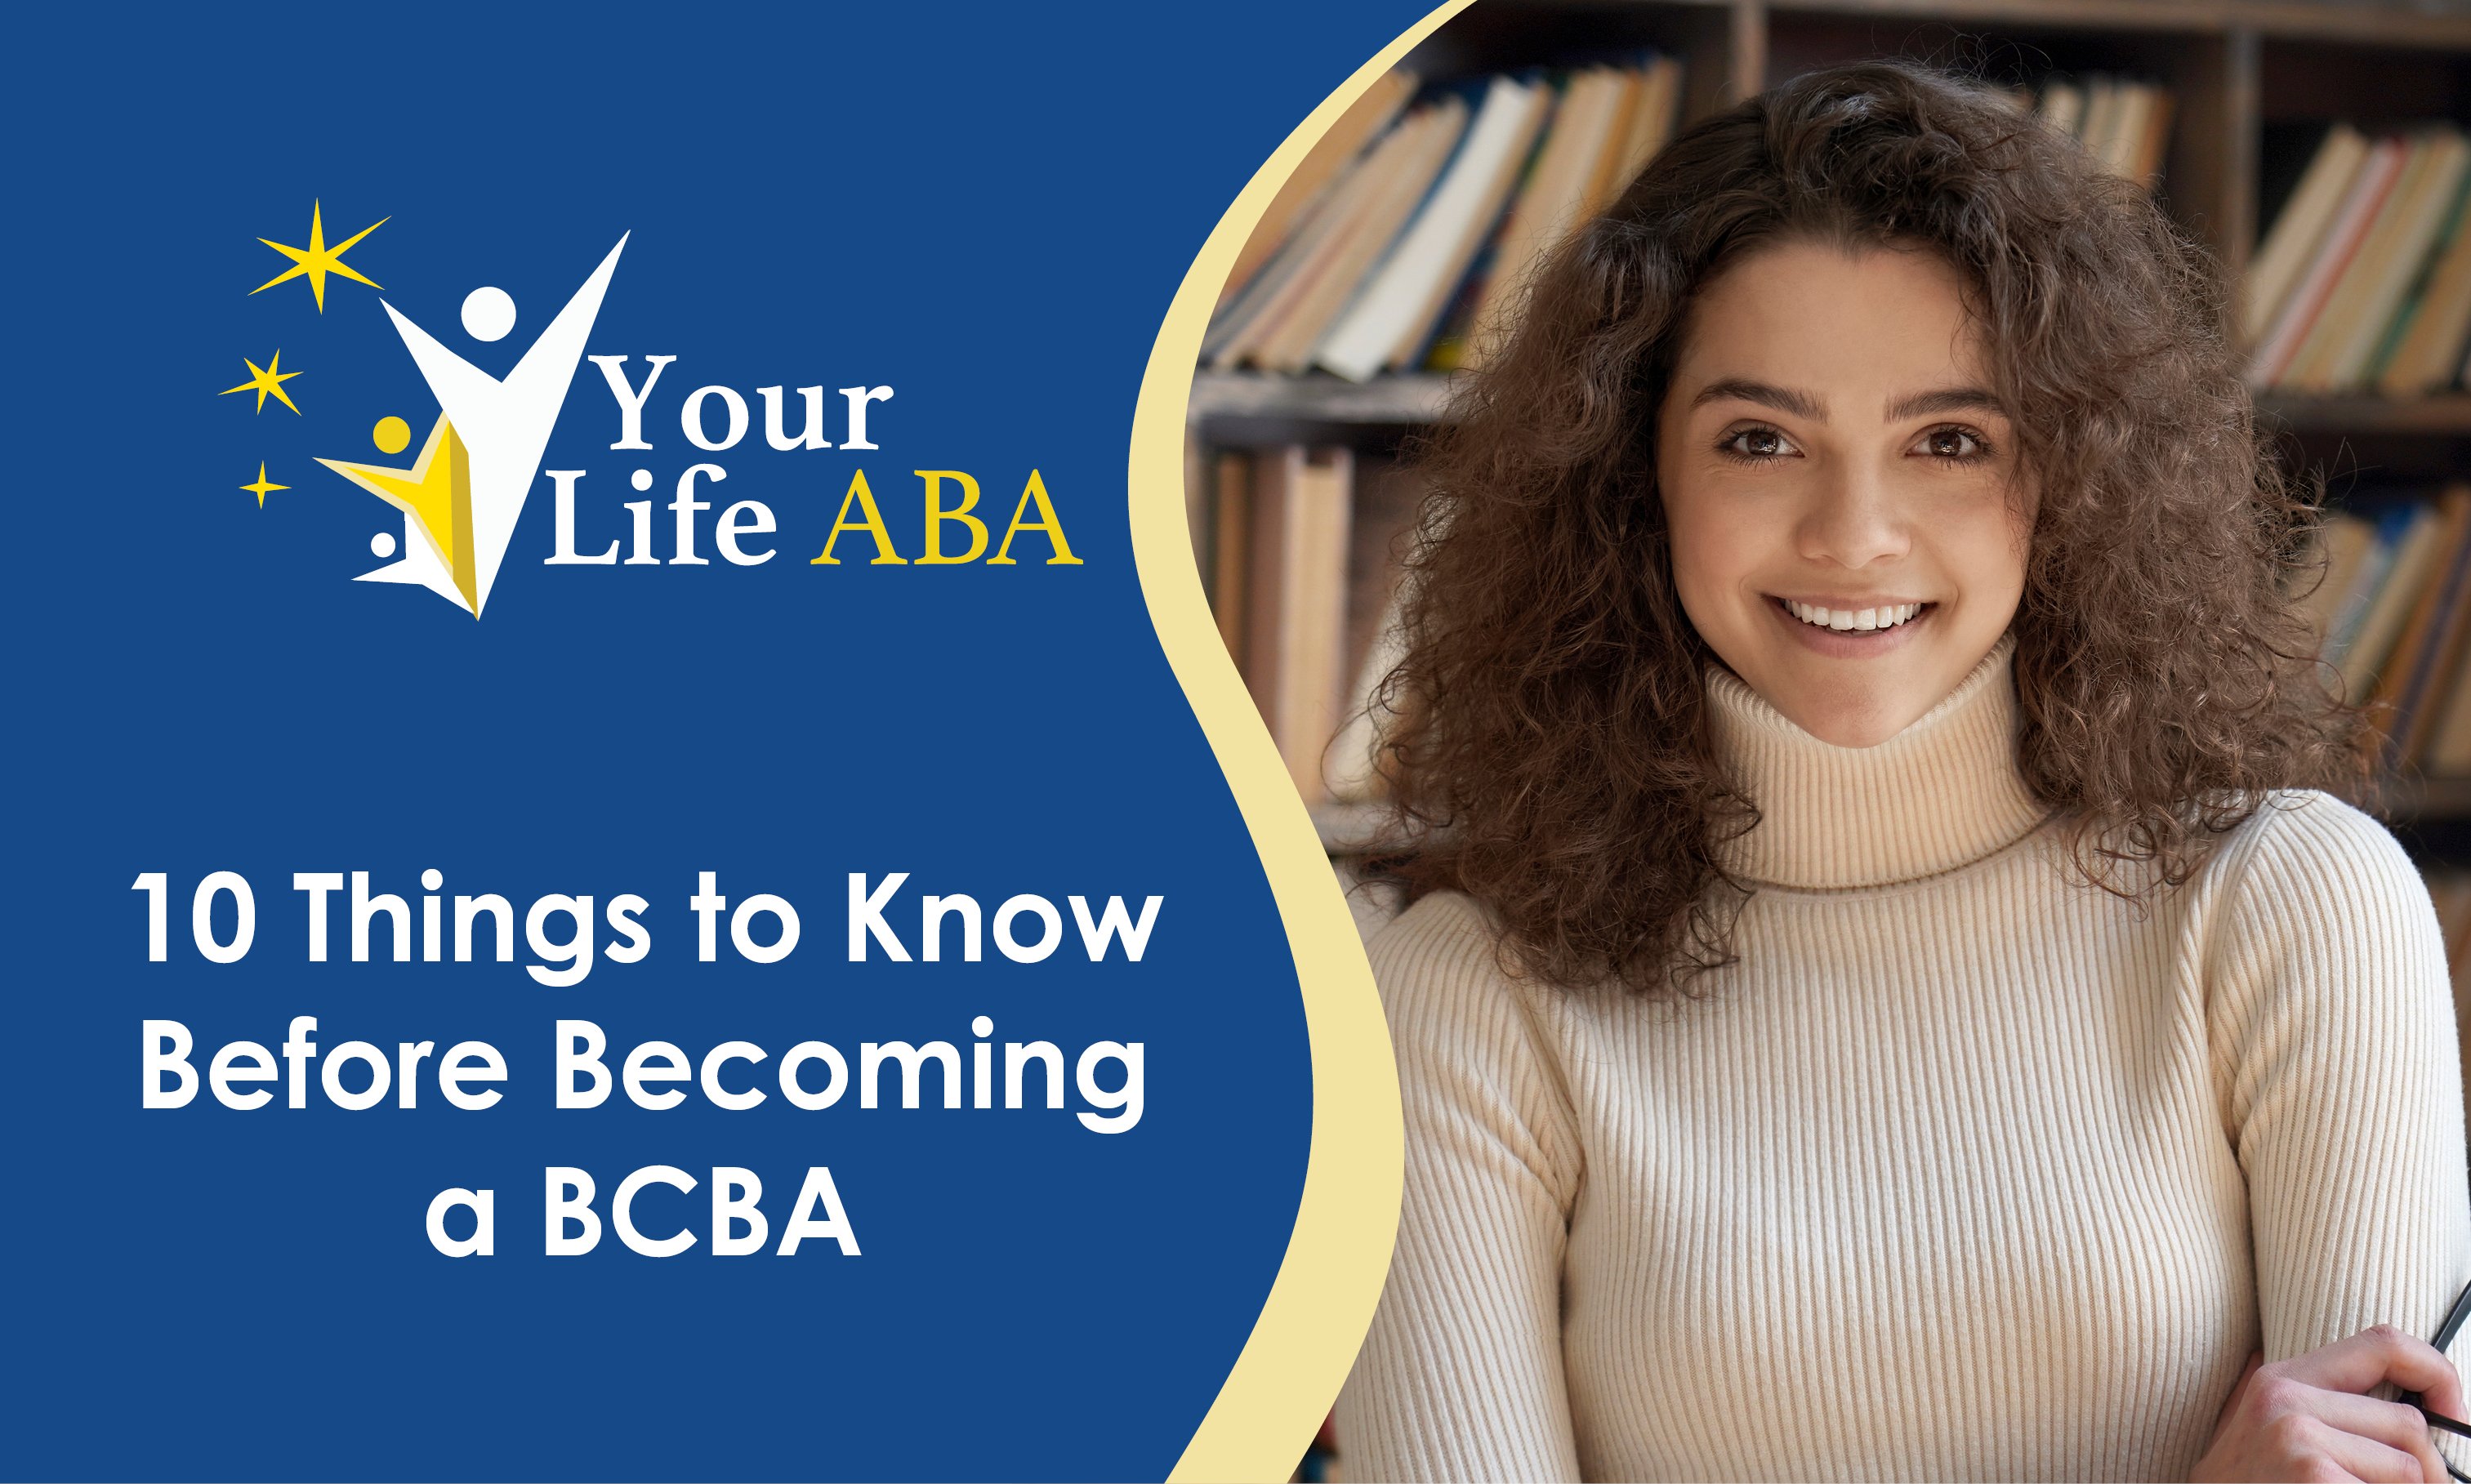 10 Things to Know Before Becoming a BCBA